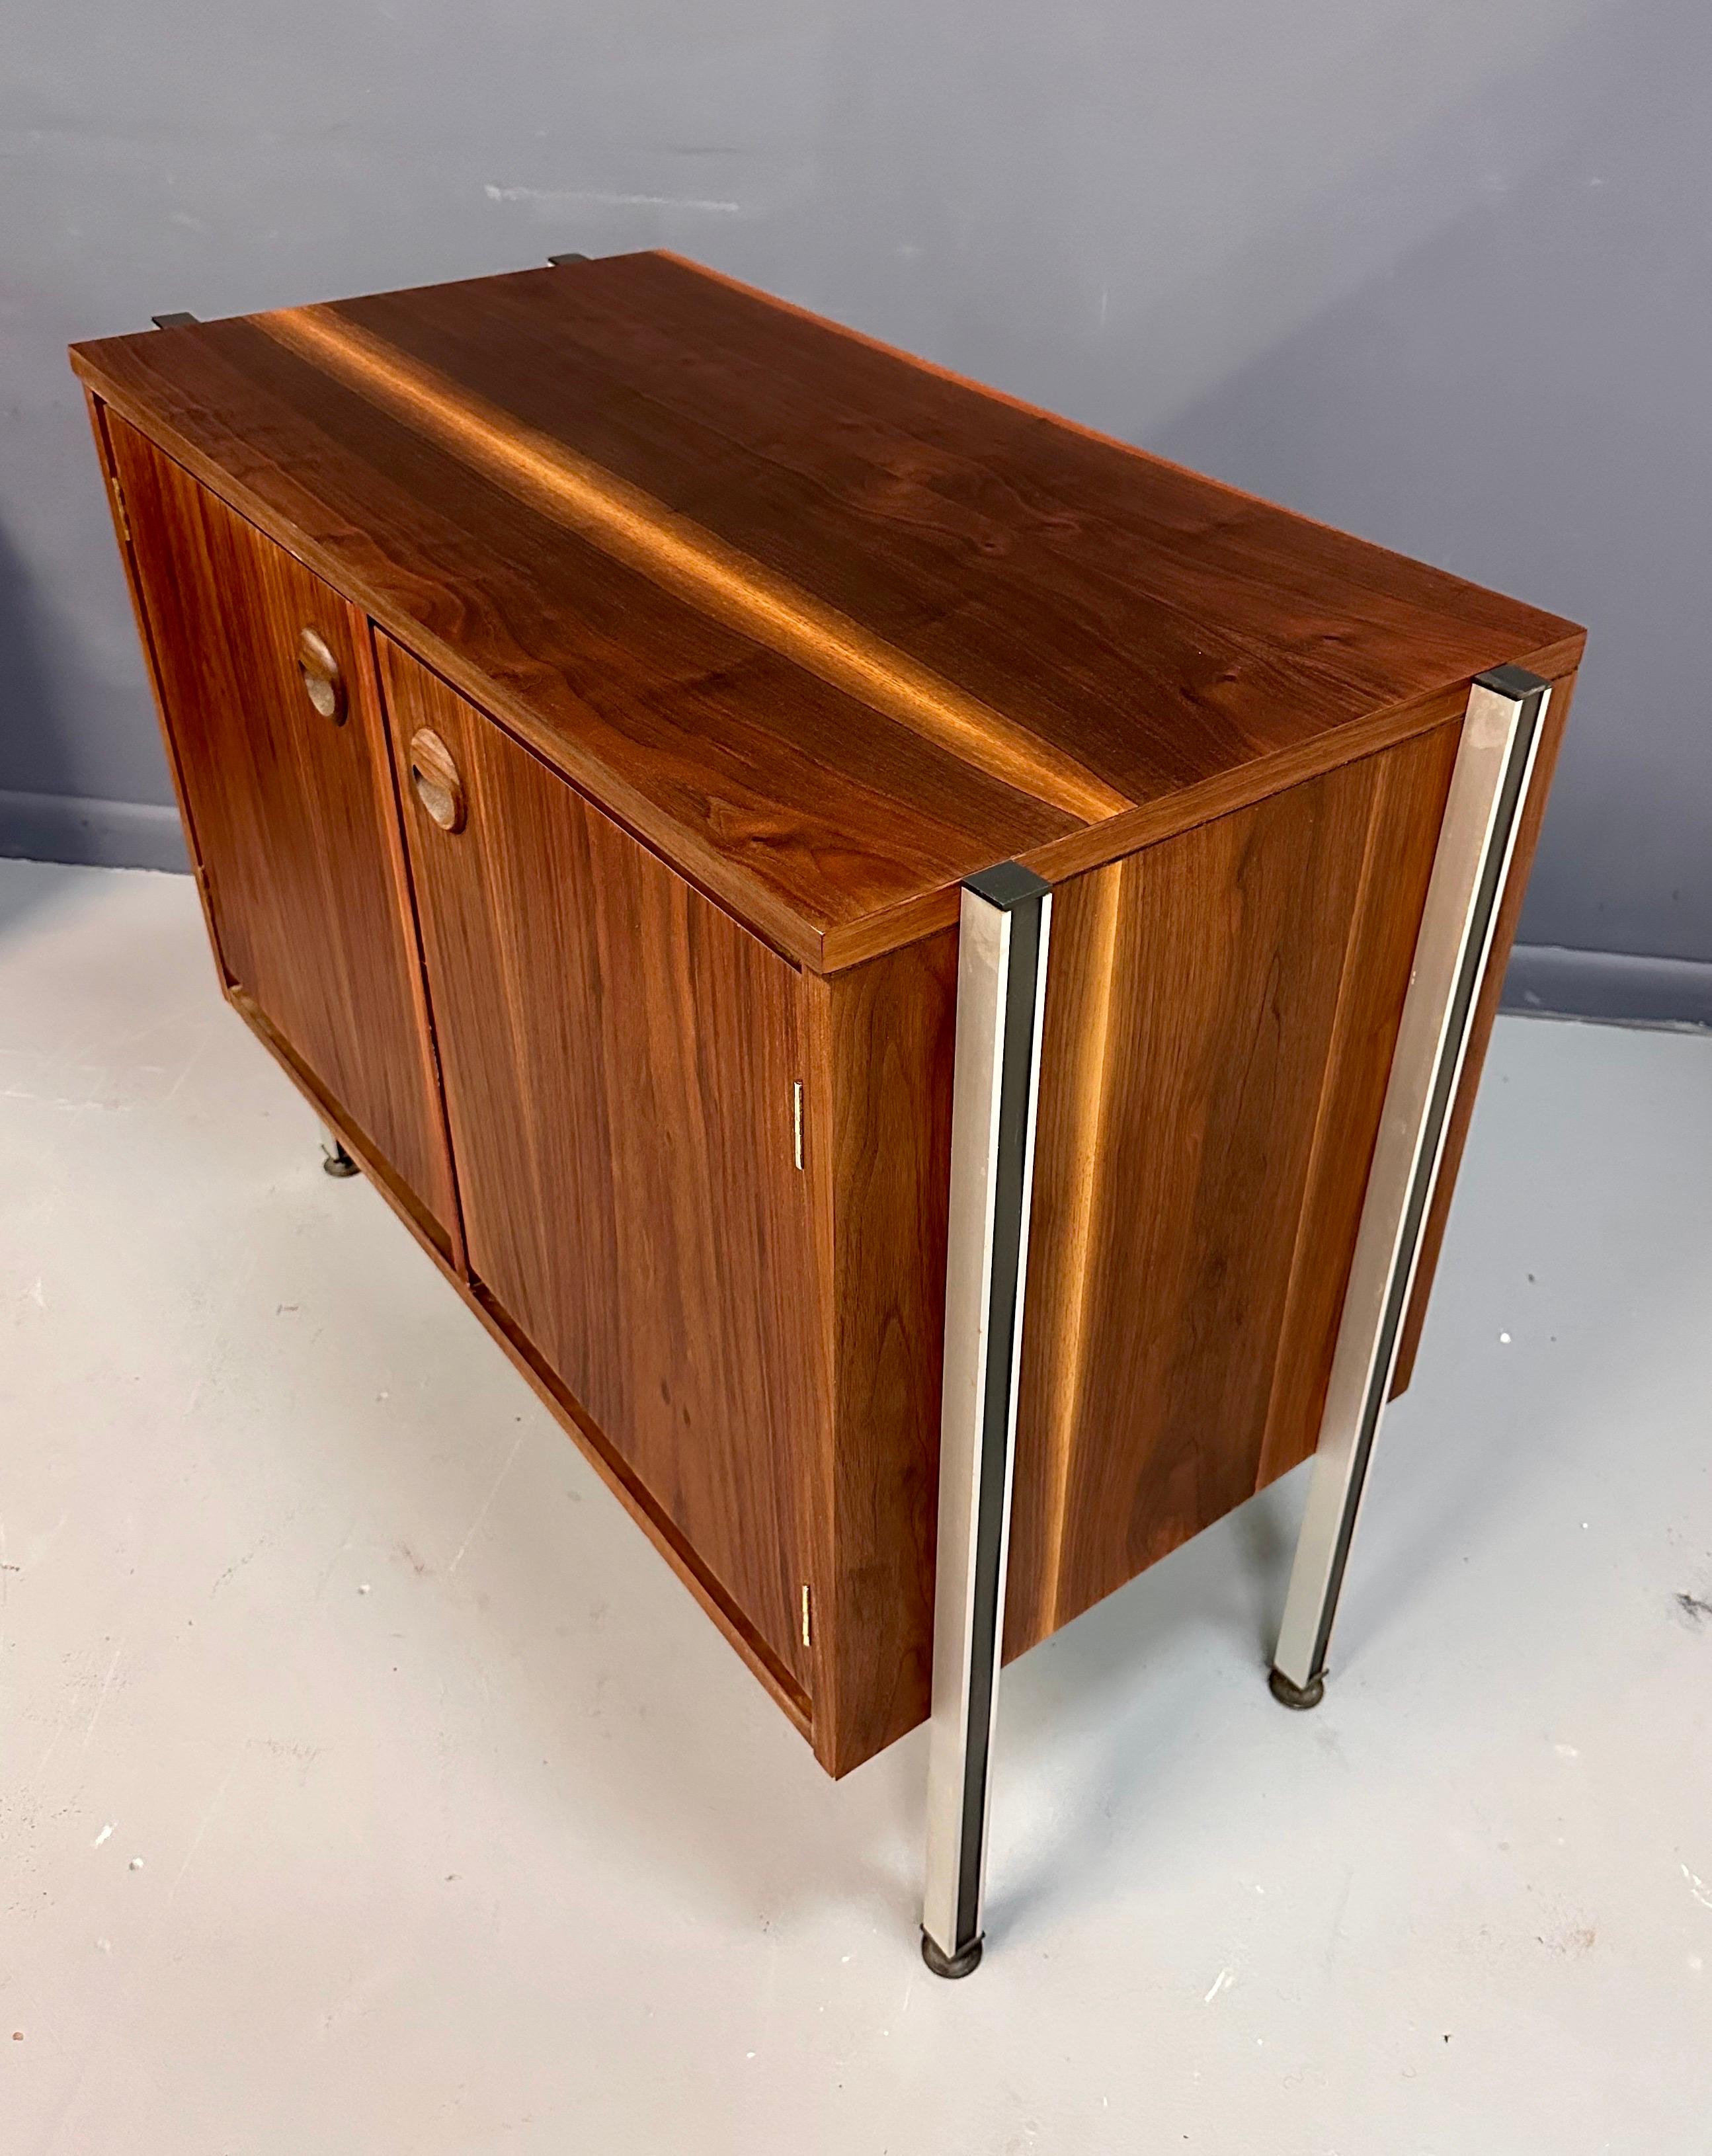 North American Pair of Midcentury Walnut Cabinets with Exposed Aluminum Legs Style of Wormley